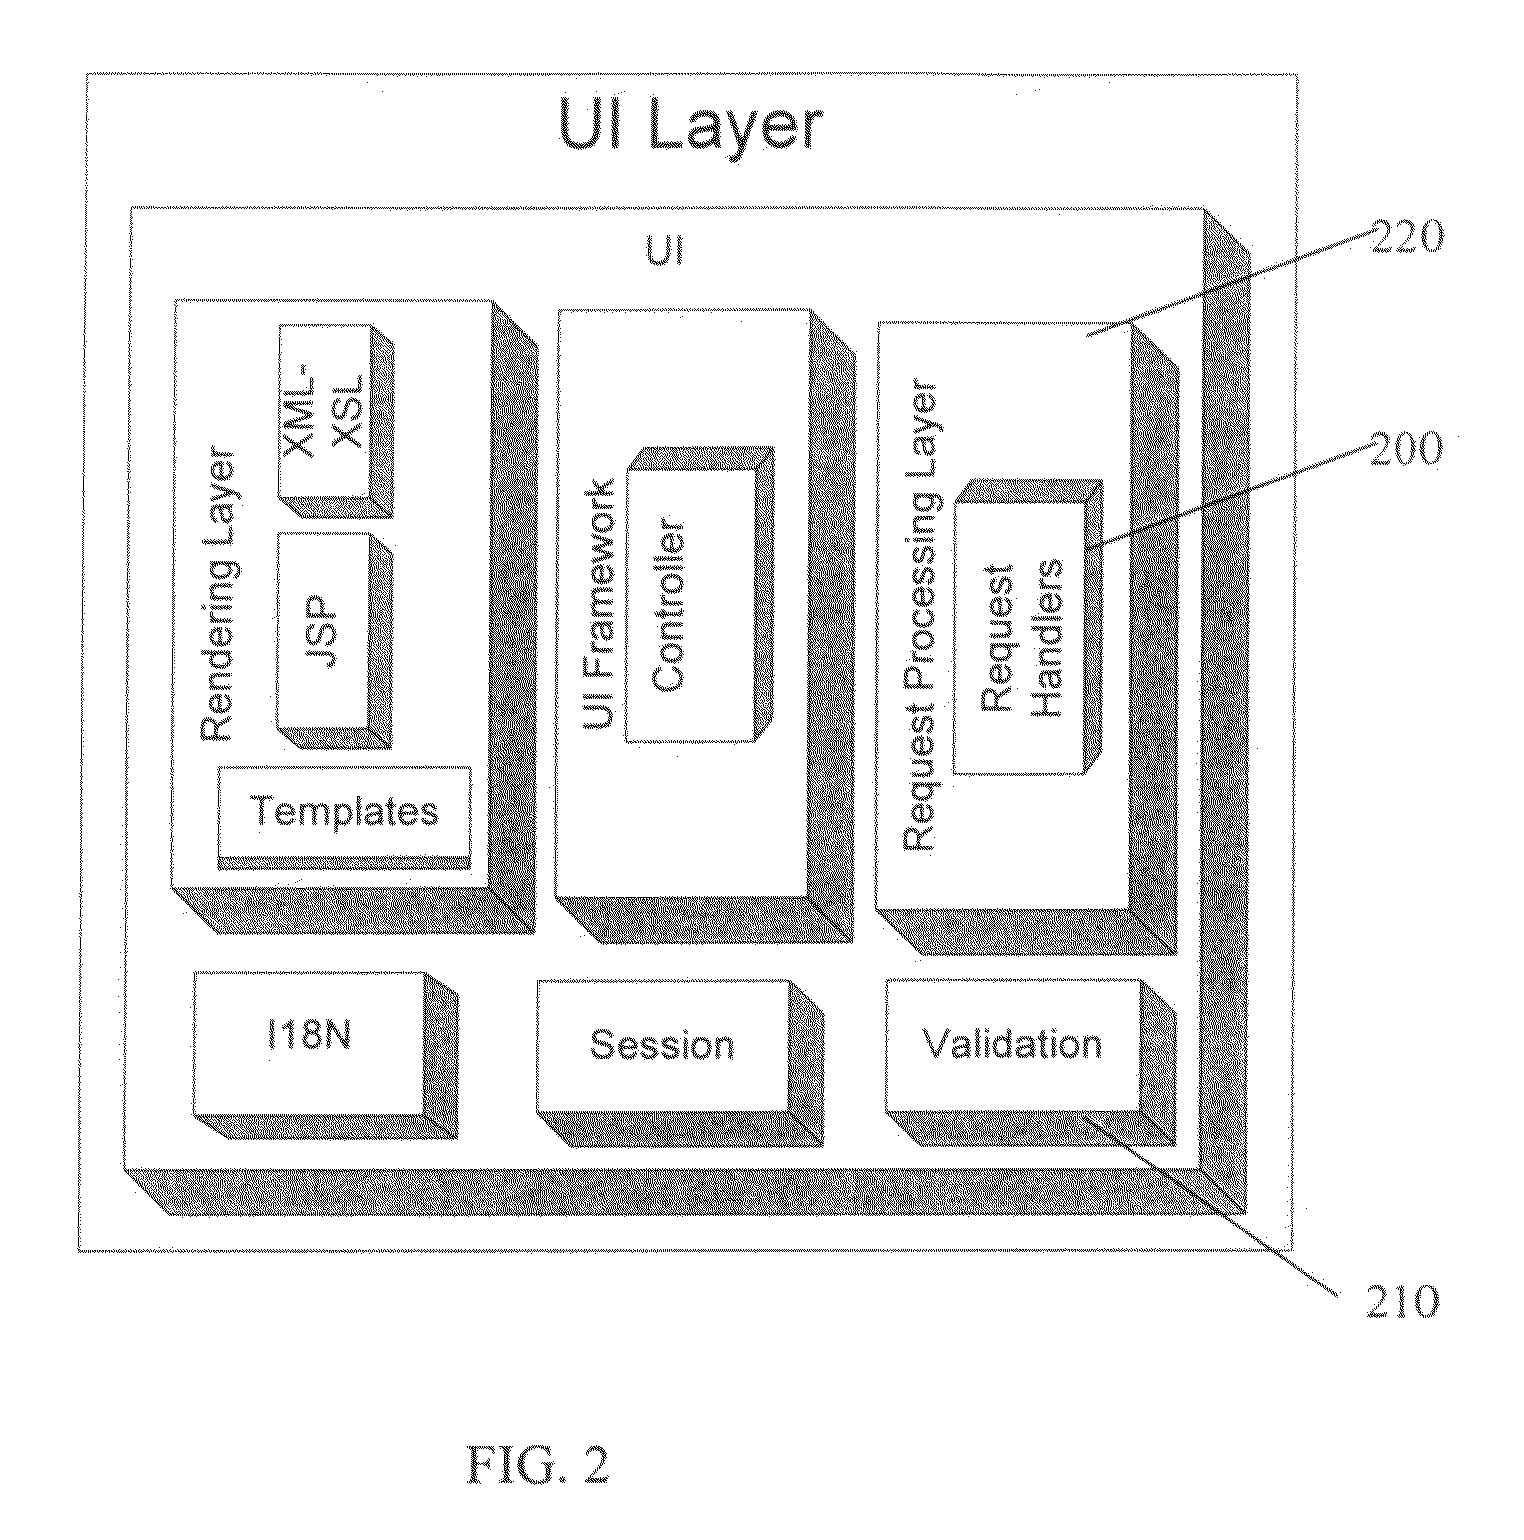 Method for handling cross-cutting concerns at business level